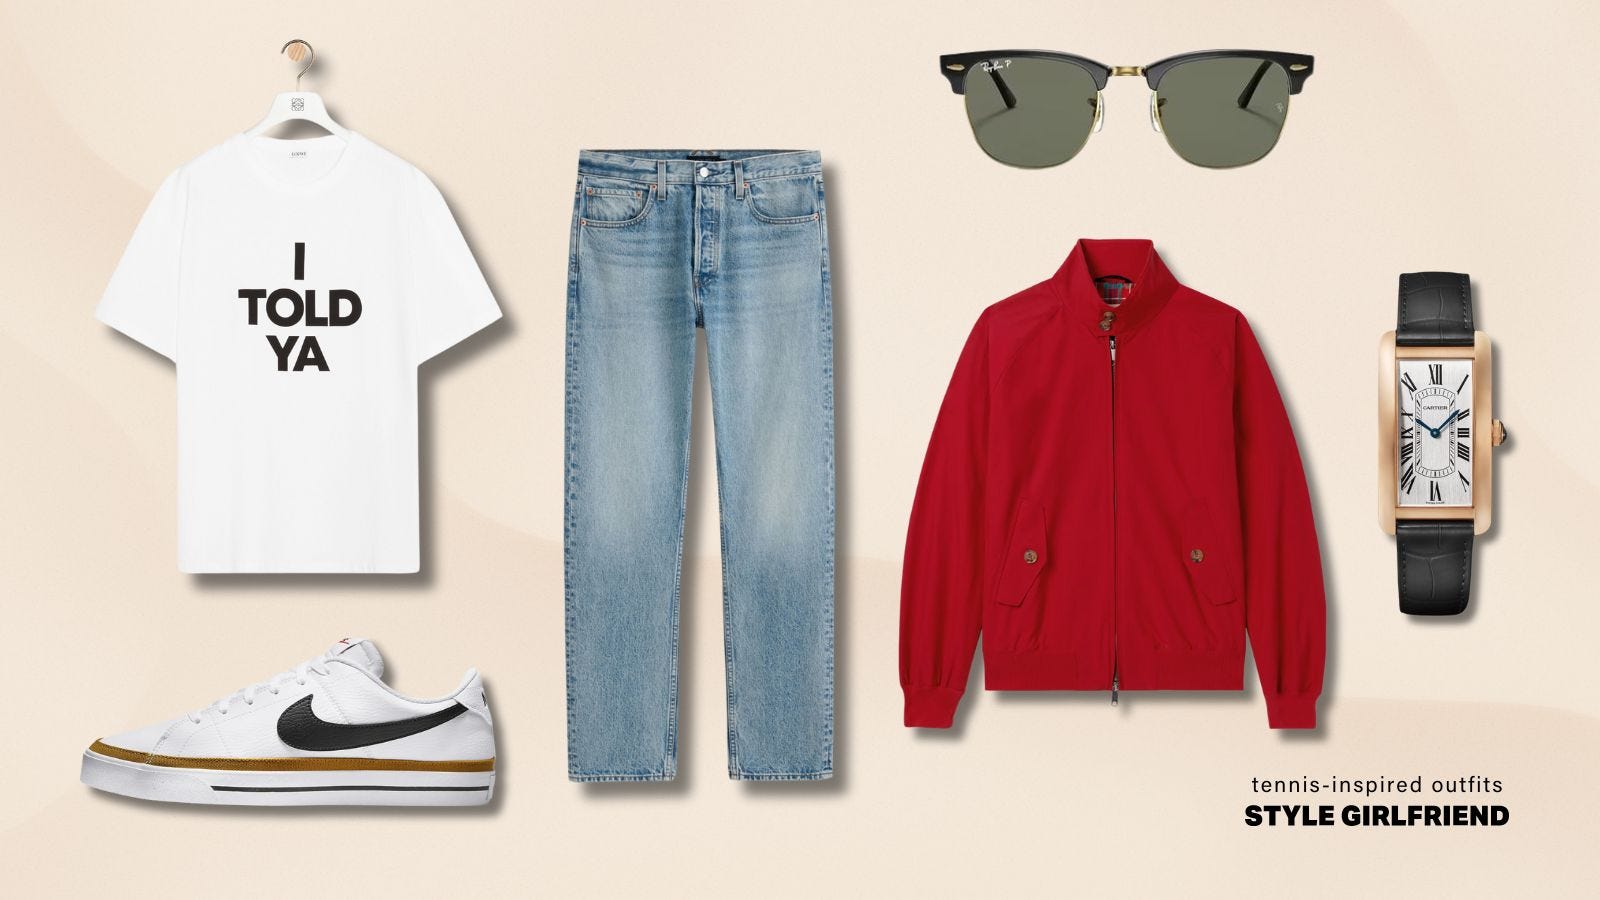 flat lay image of a casual men's outfit with the 'I told ya' t-shirt from the Challengers movie, also featured; jeans, a red Harrington jacket, clubmaster sunglasses and a cartier watch